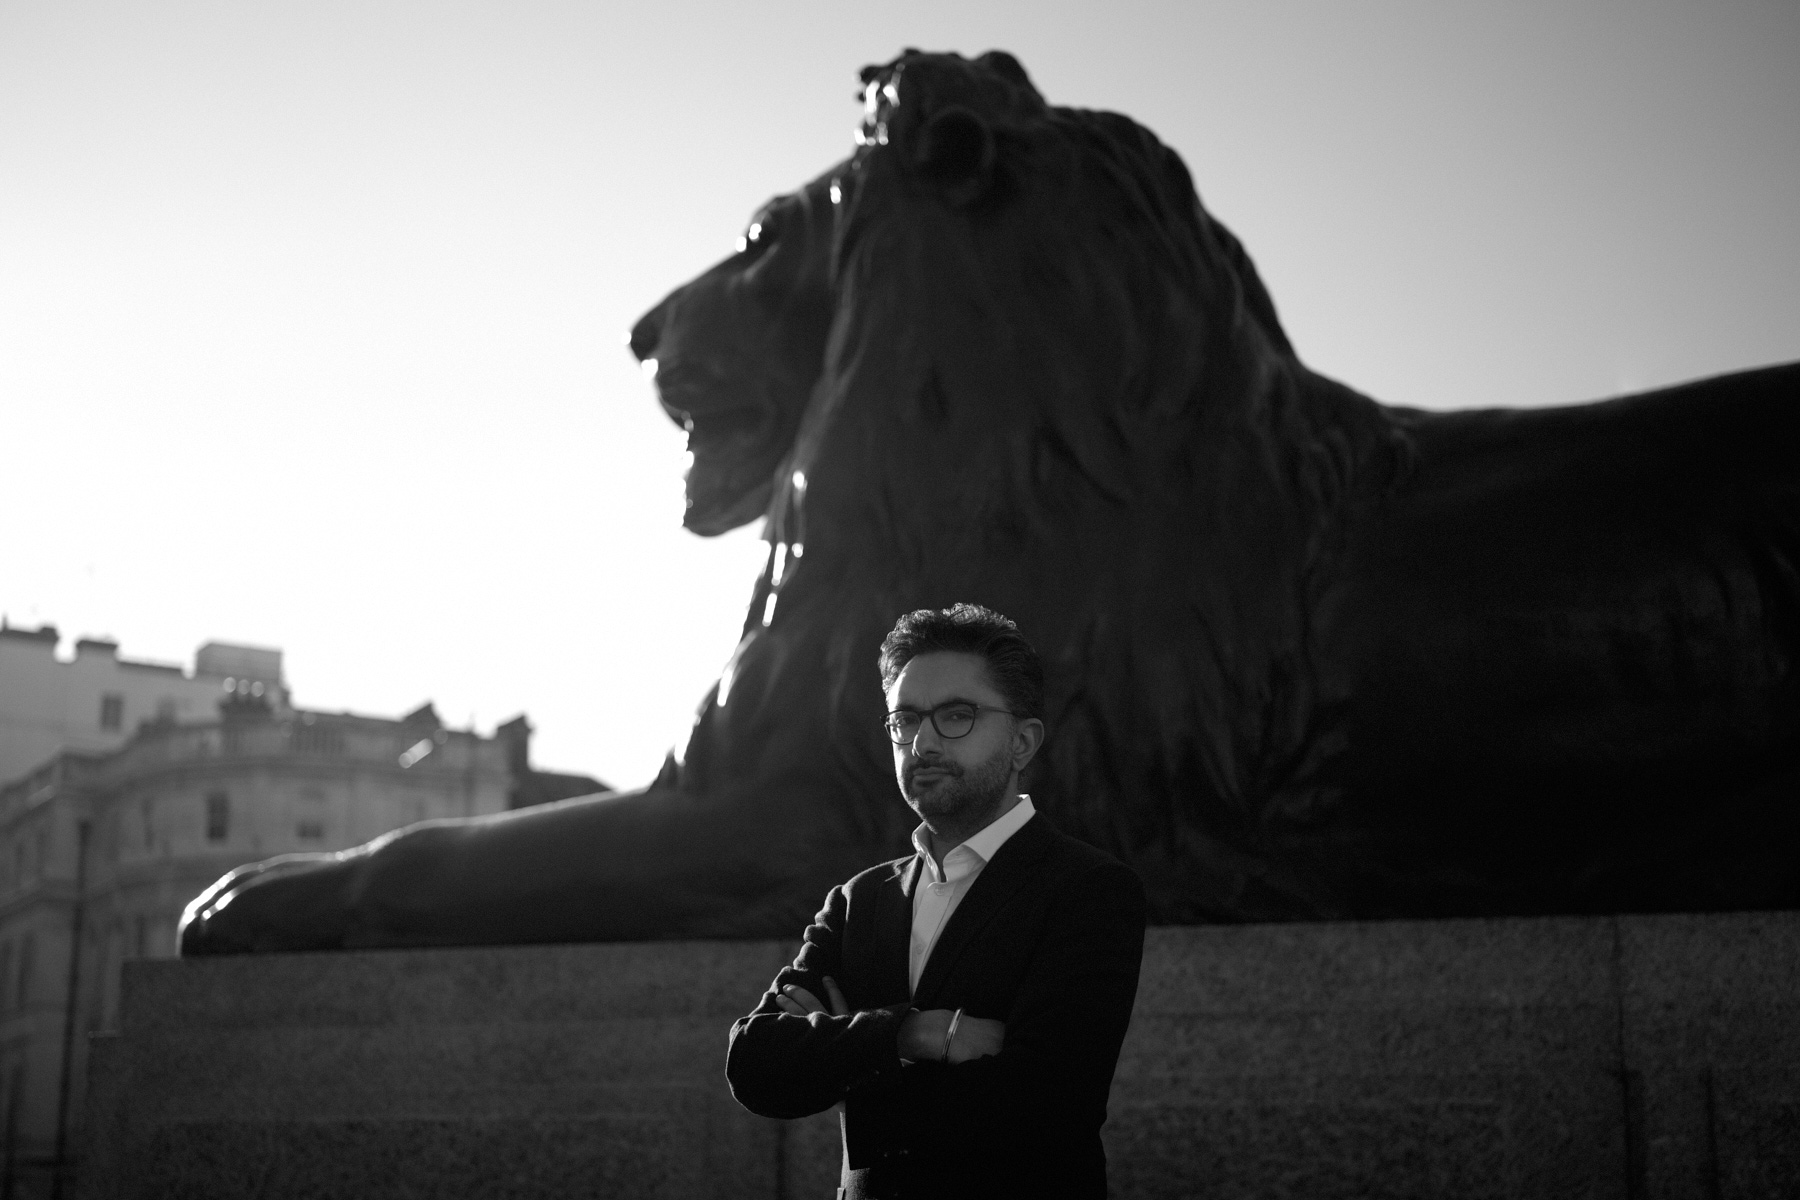 Image of Sathnam Sanghera standing by a lion in Trafalgar square